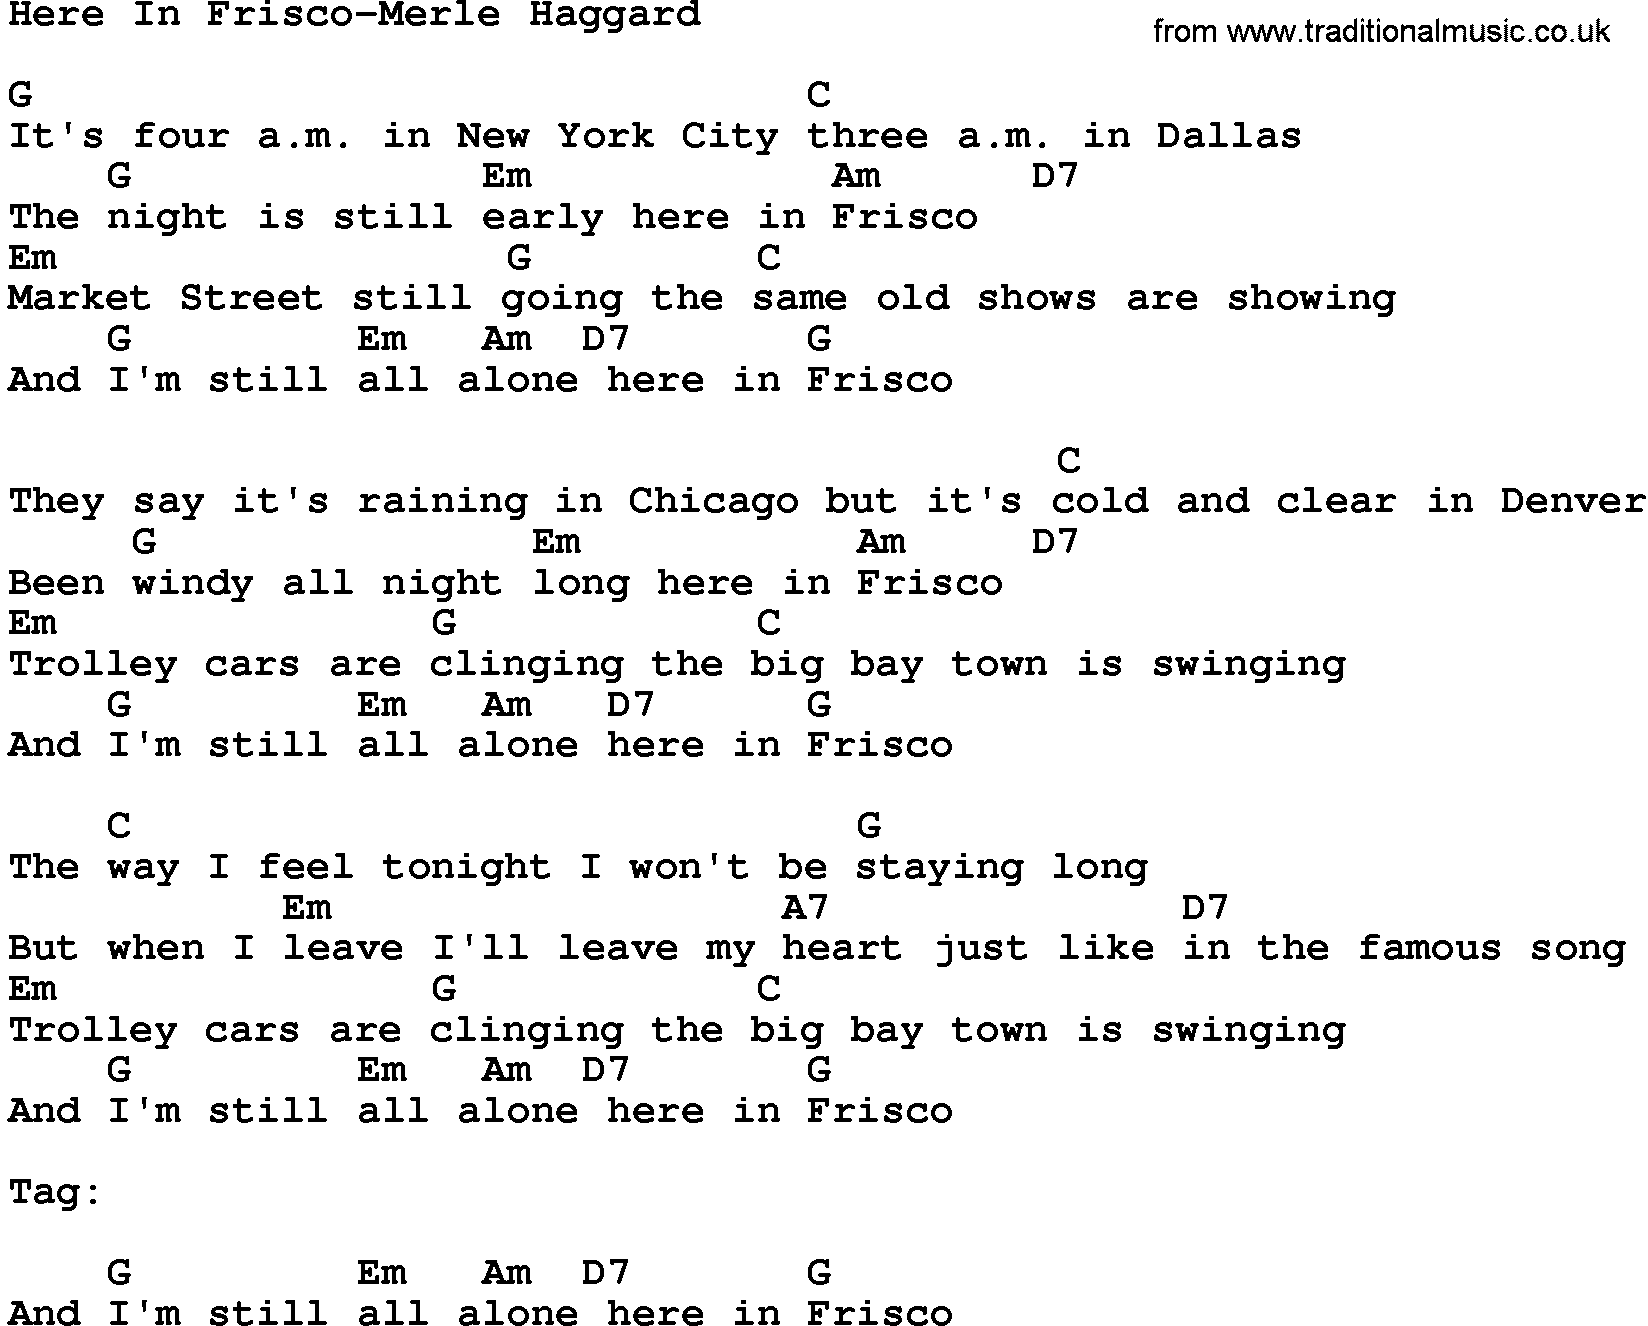 Country music song: Here In Frisco-Merle Haggard lyrics and chords